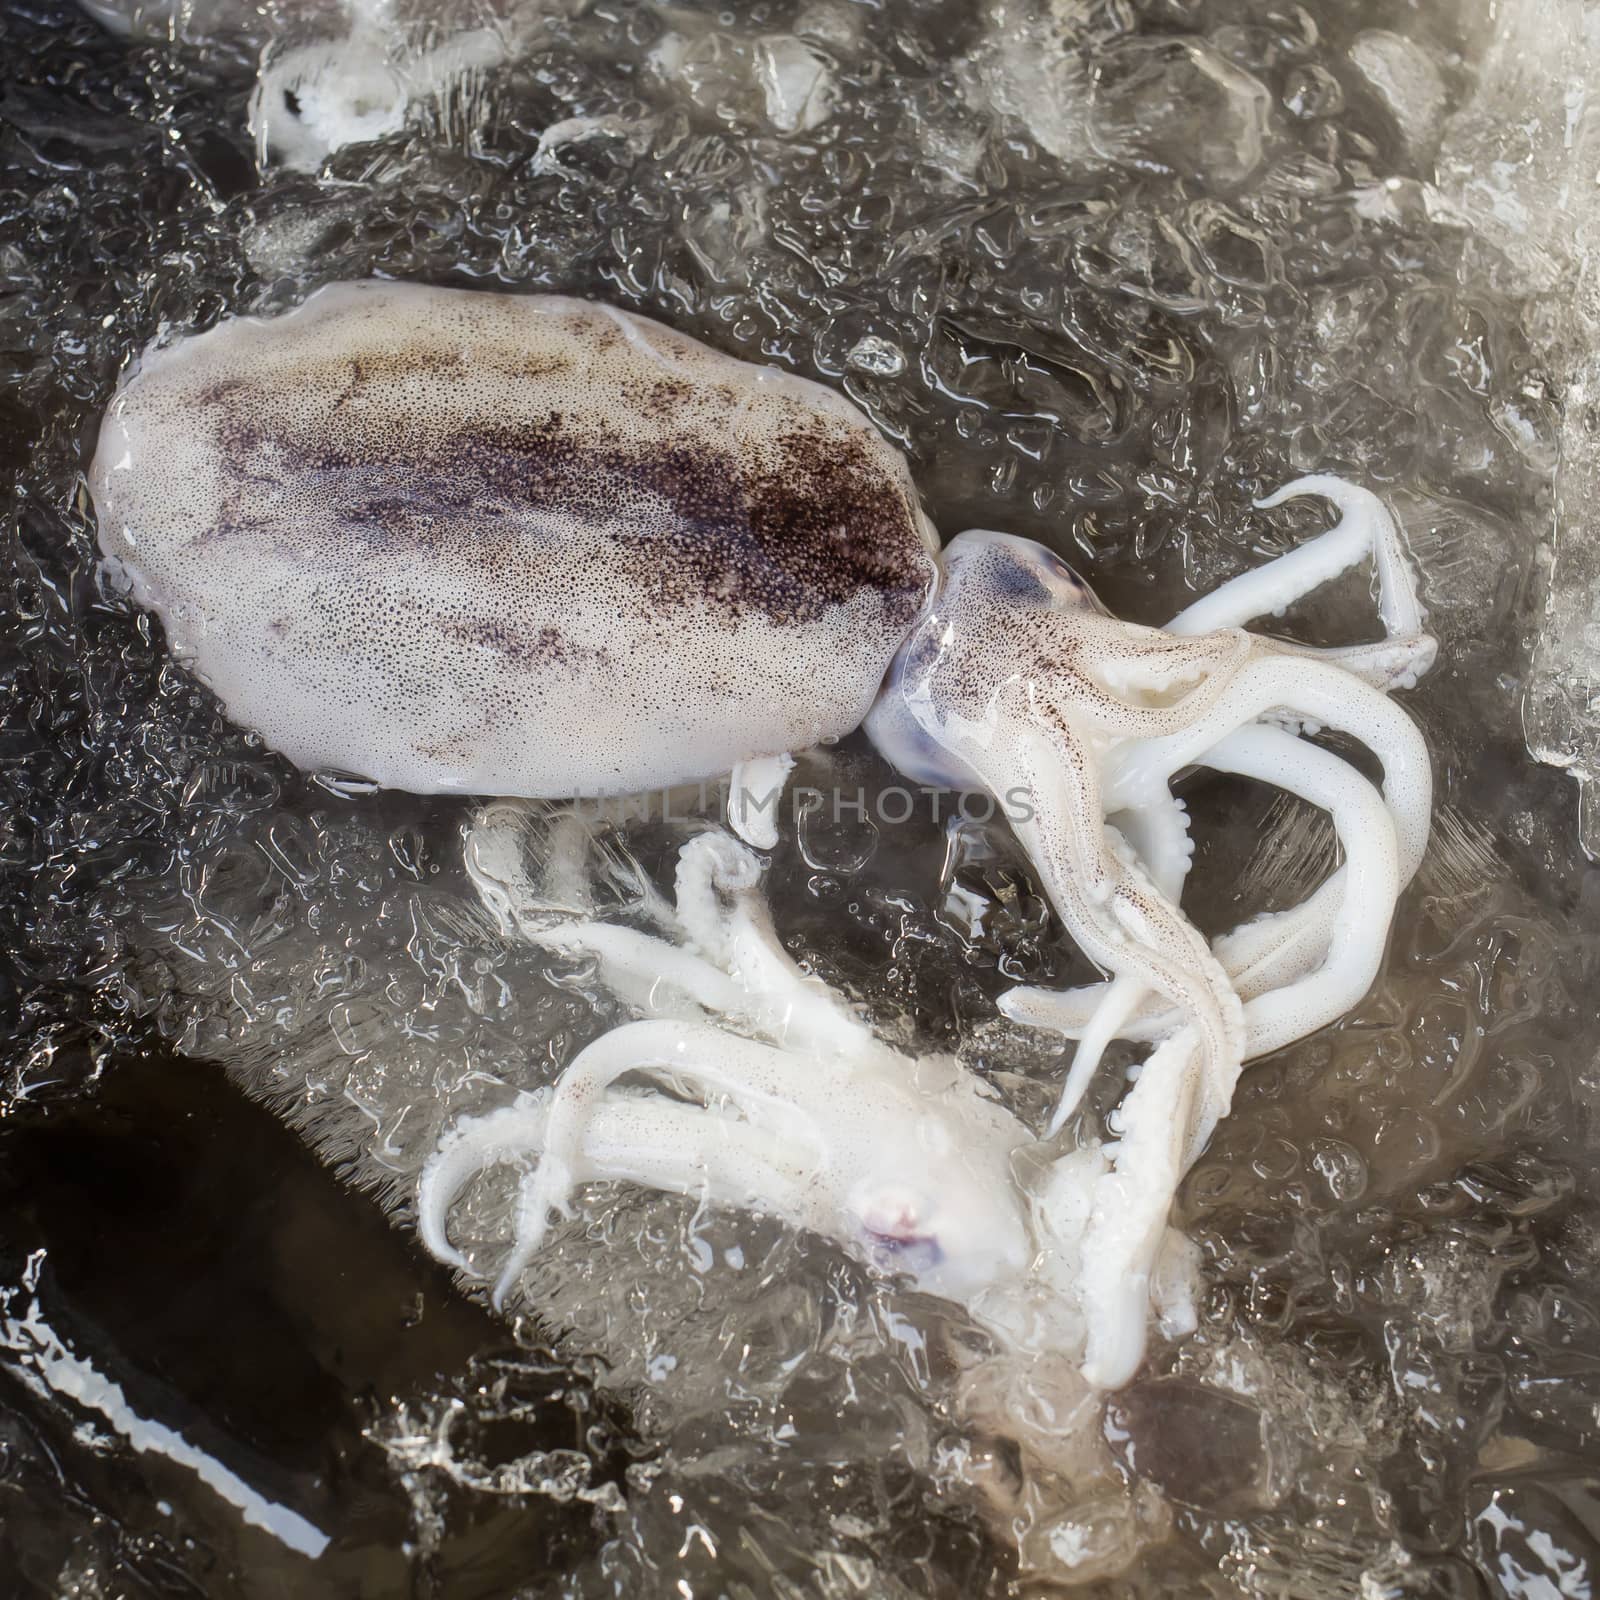 Raw octopus ready for sell in market